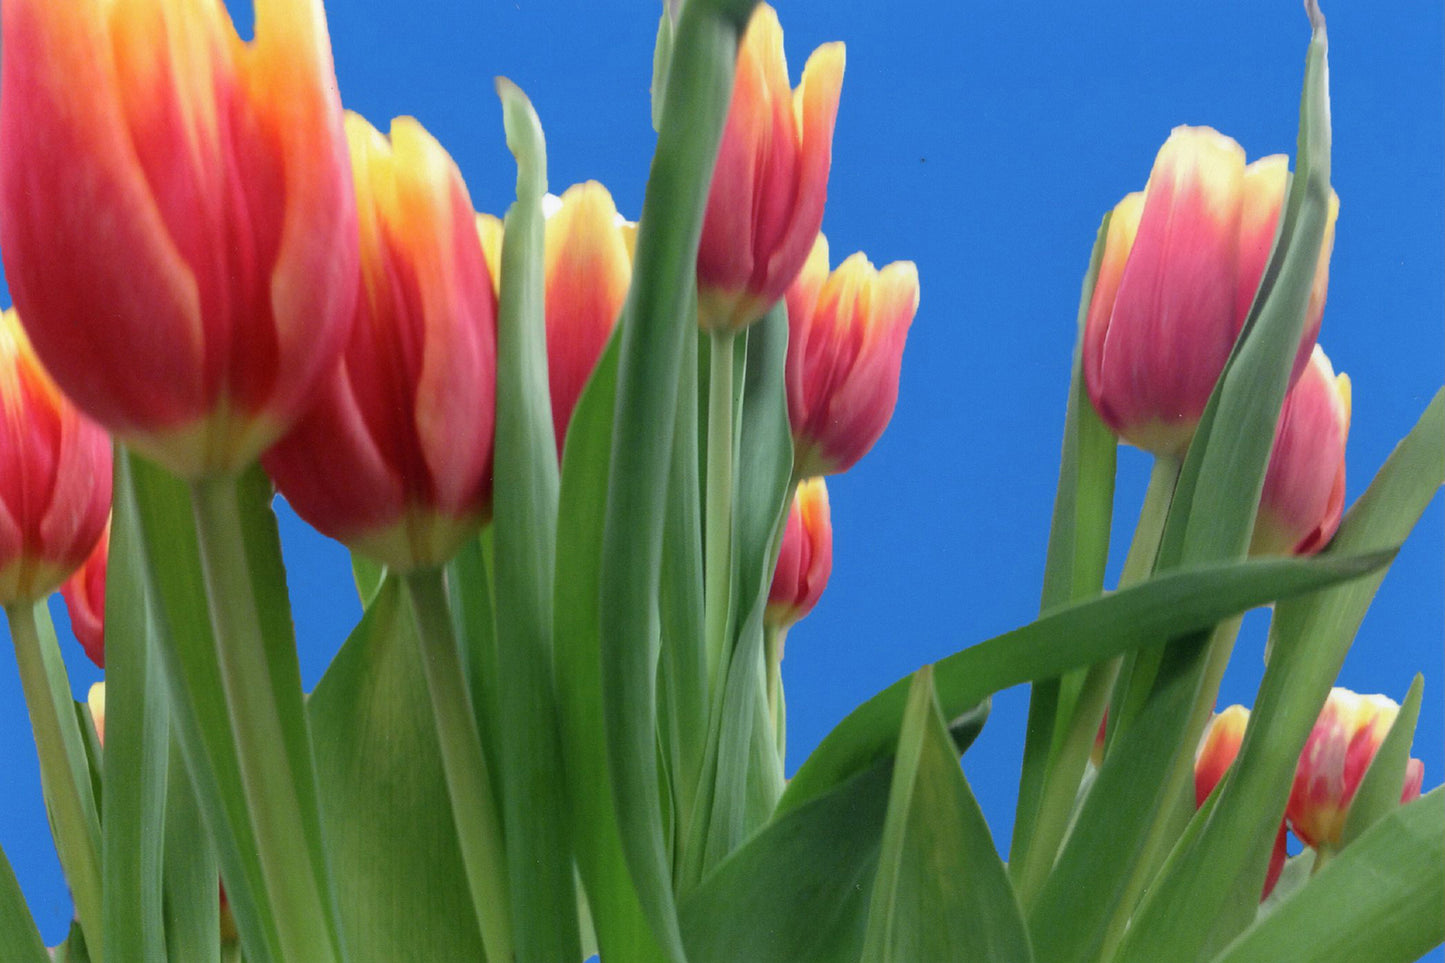 Photograph of tulips and blue sky